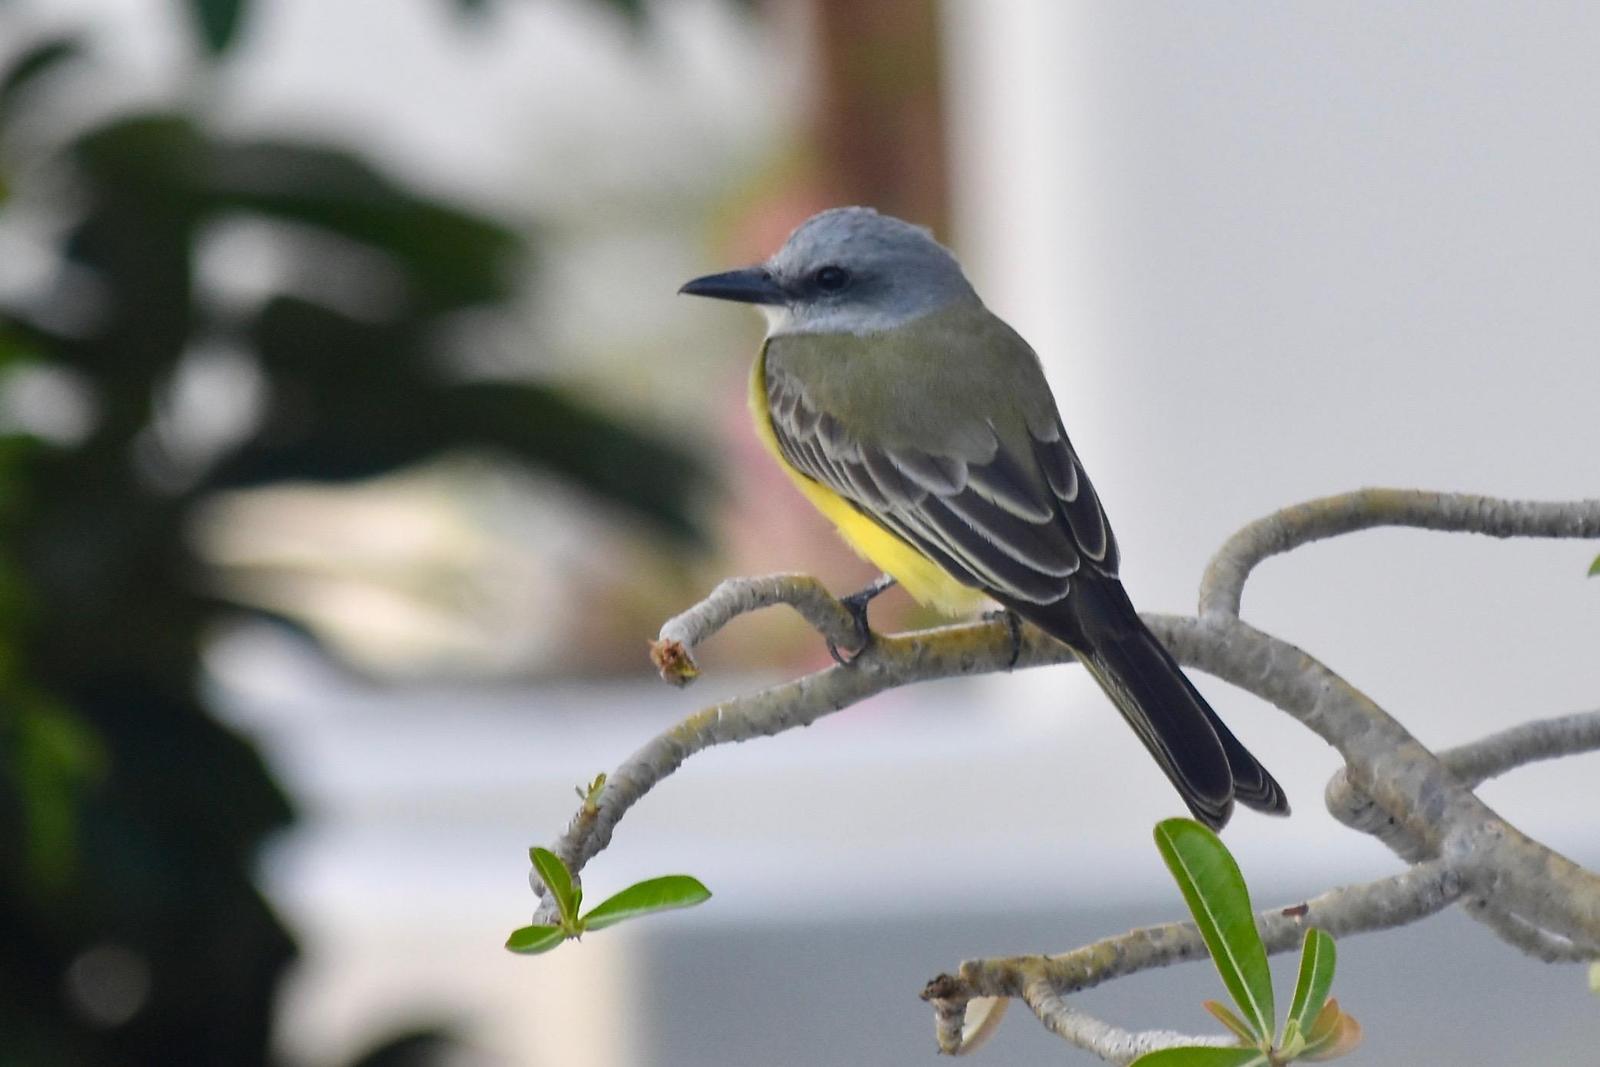 Tropical Kingbird Photo by Evelyn [aret